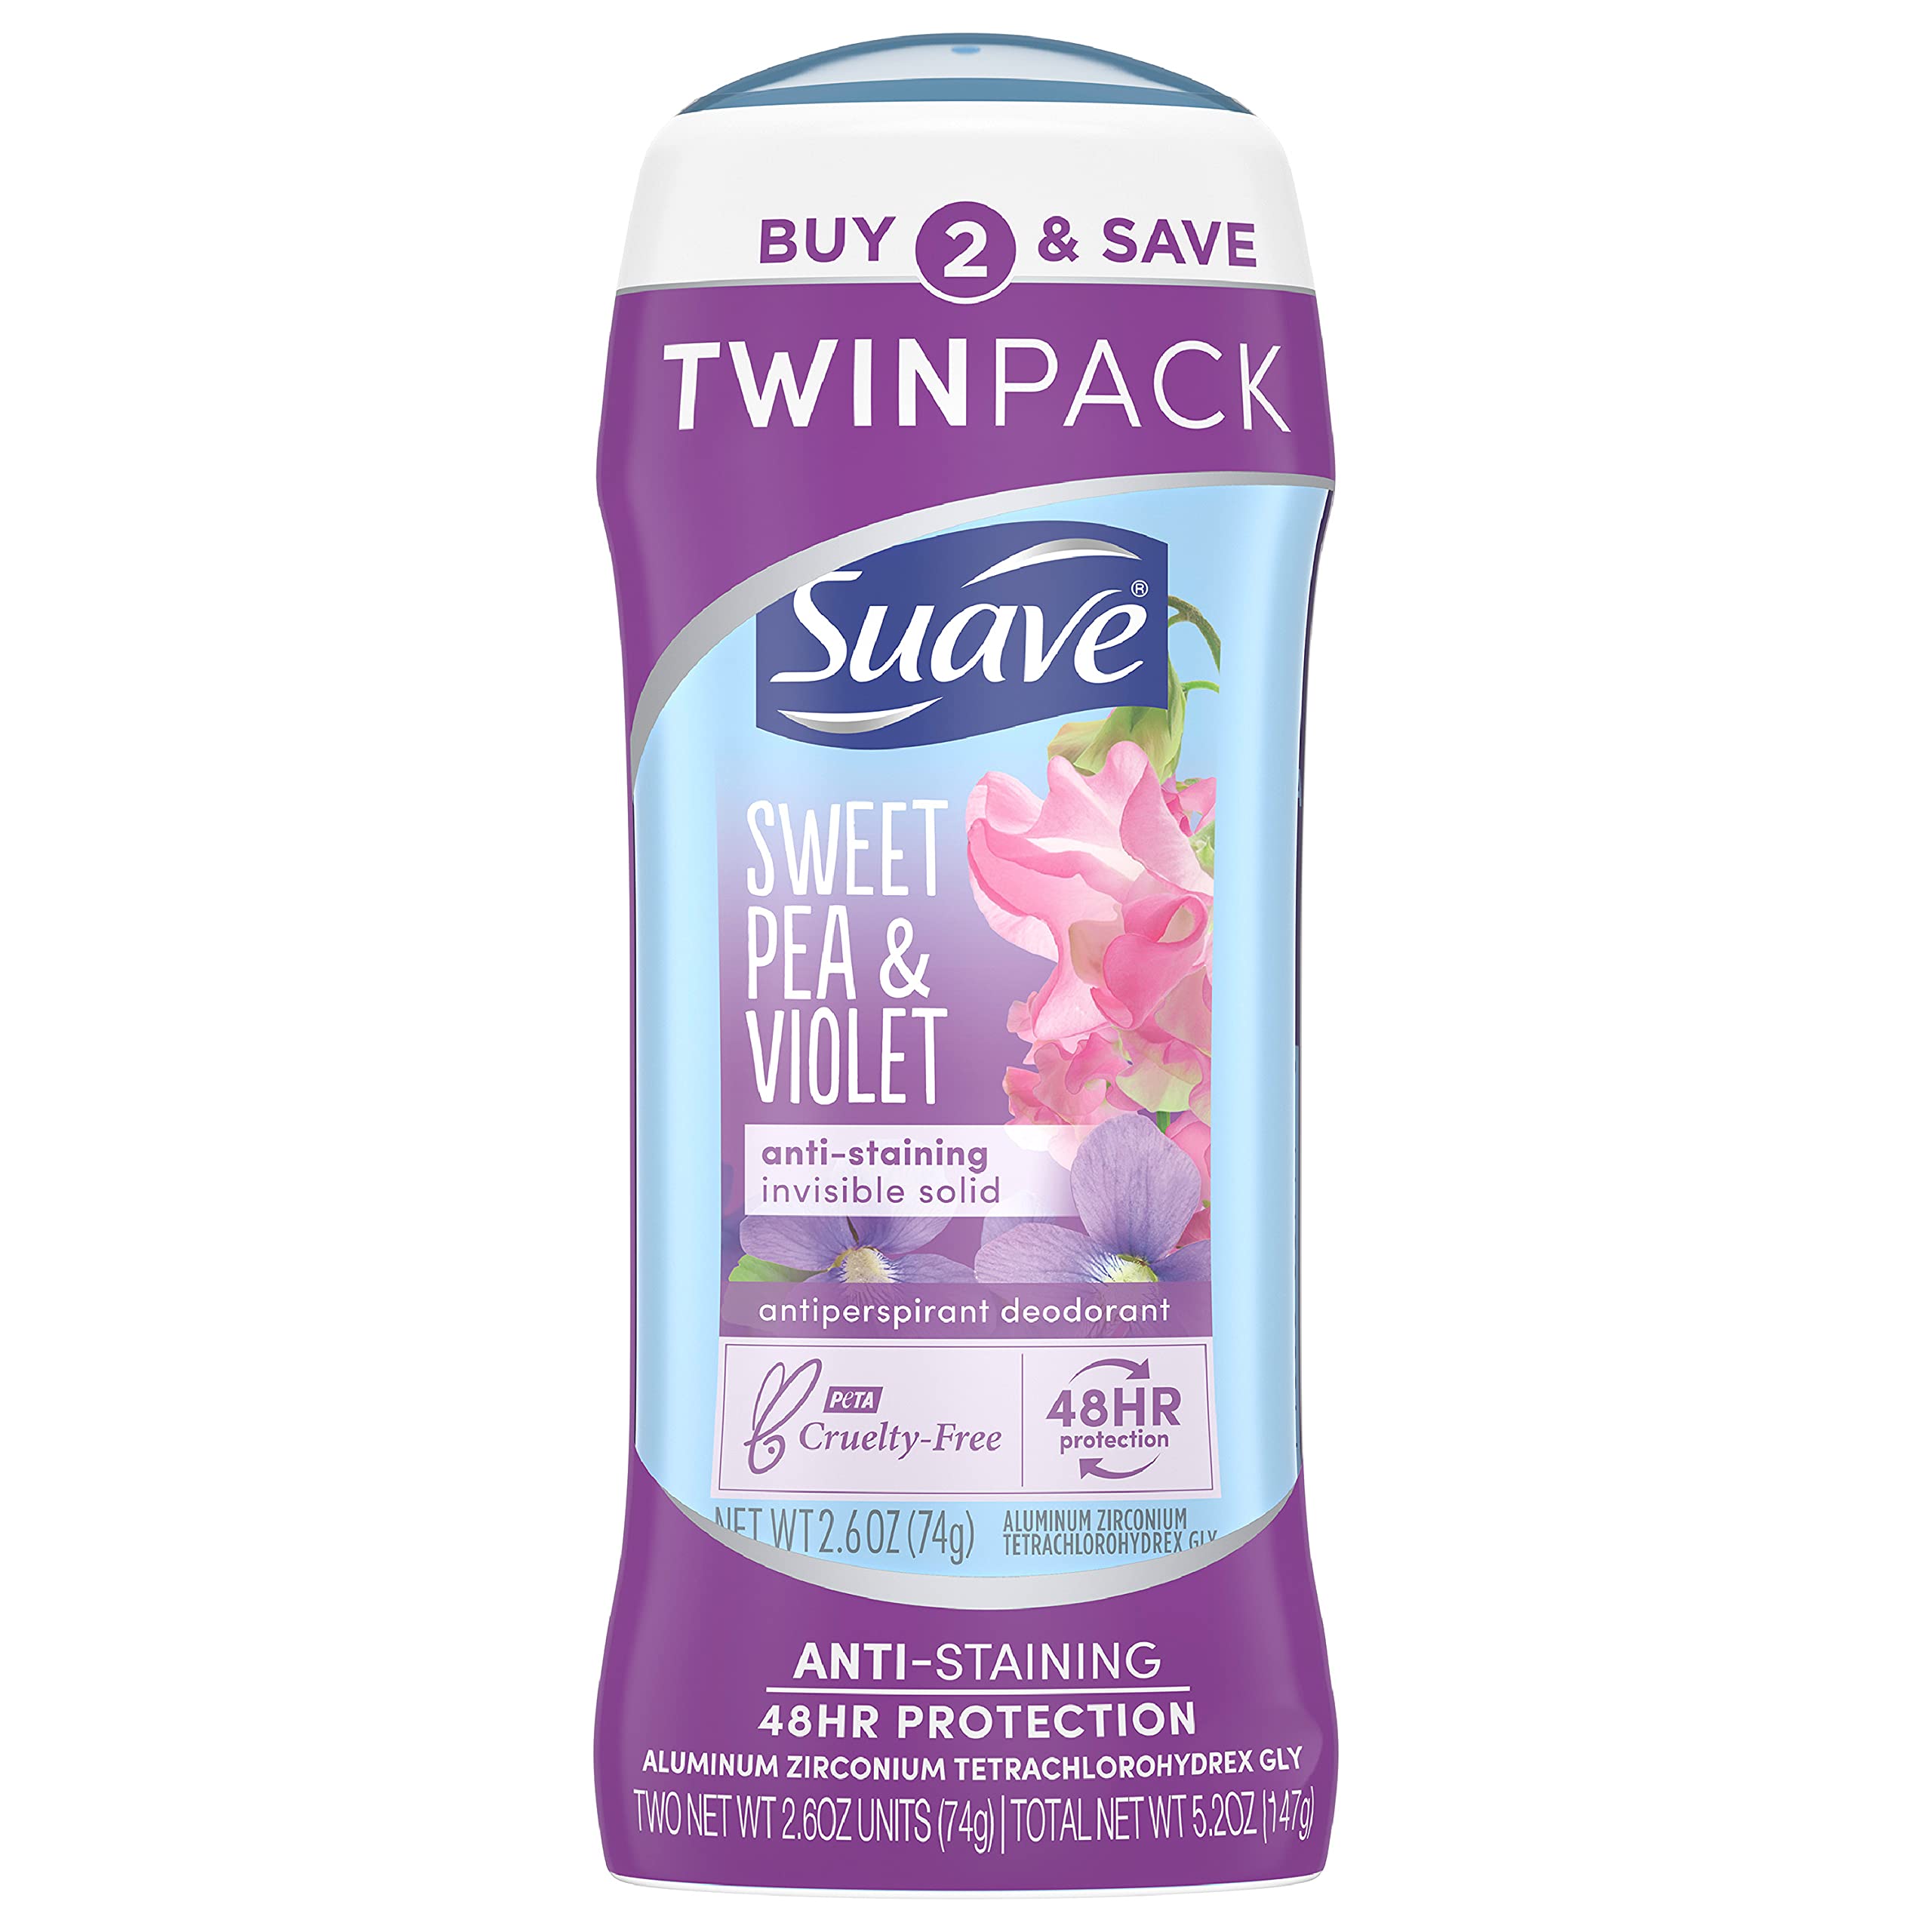 Suave Deodorant Antiperspirant Deodorant Stick 48-hour Odor and Wetness Protection Sweet Pea Violet Deodorant for Women, 2.6 Ounce (Pack of 2)